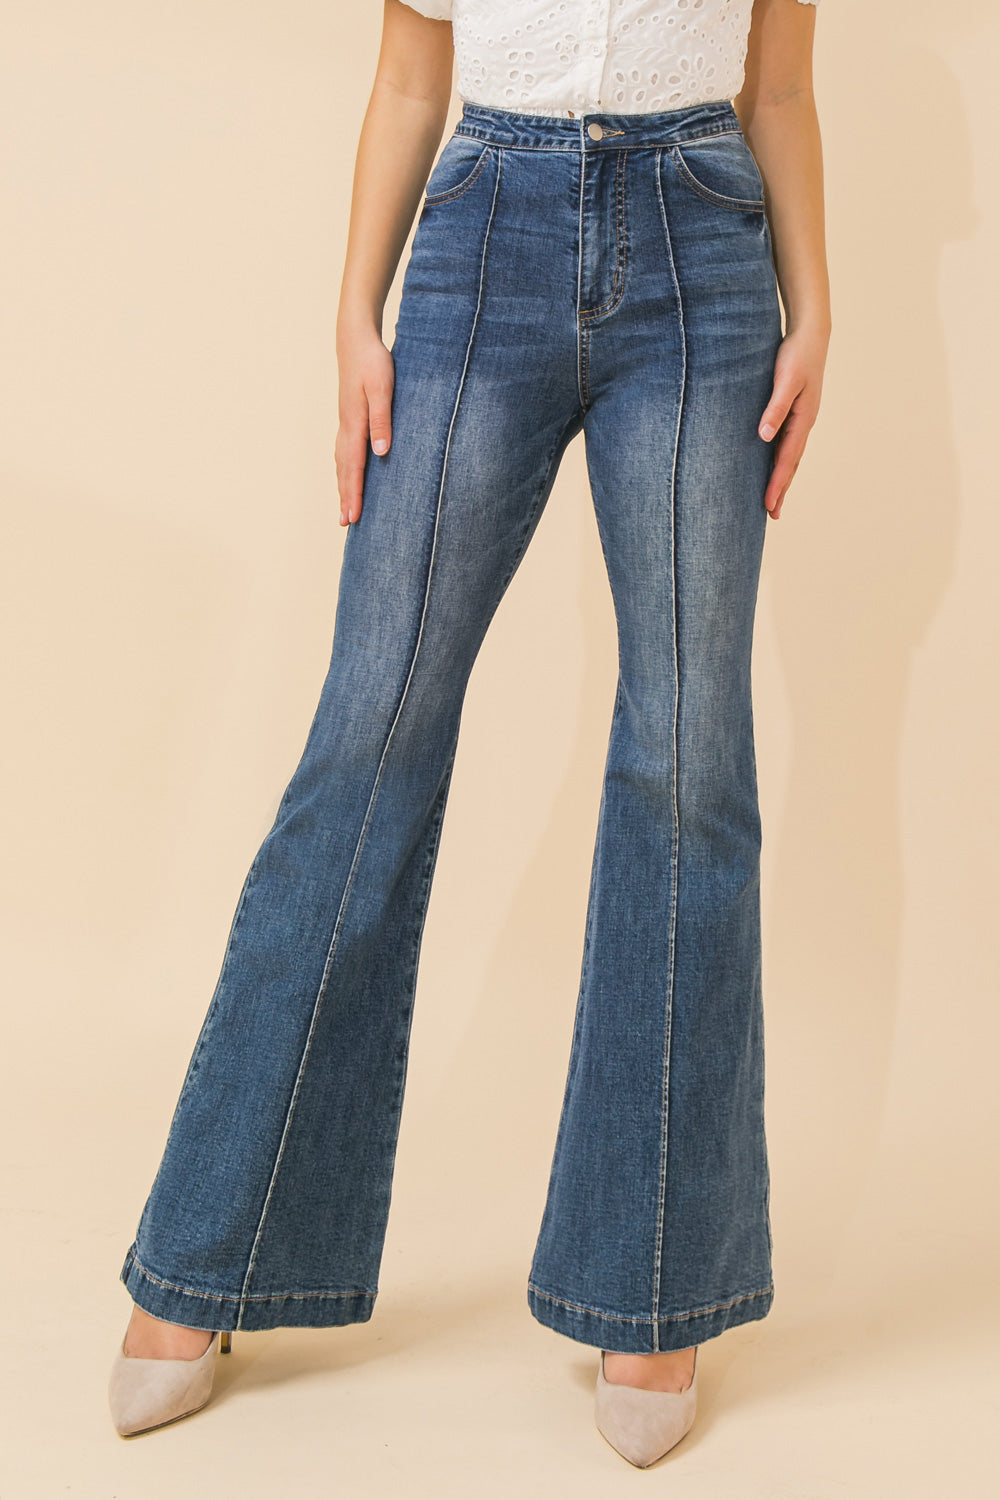 PICK YOUR LOVE FLARE JEANS l FLYING | Flying Tomato